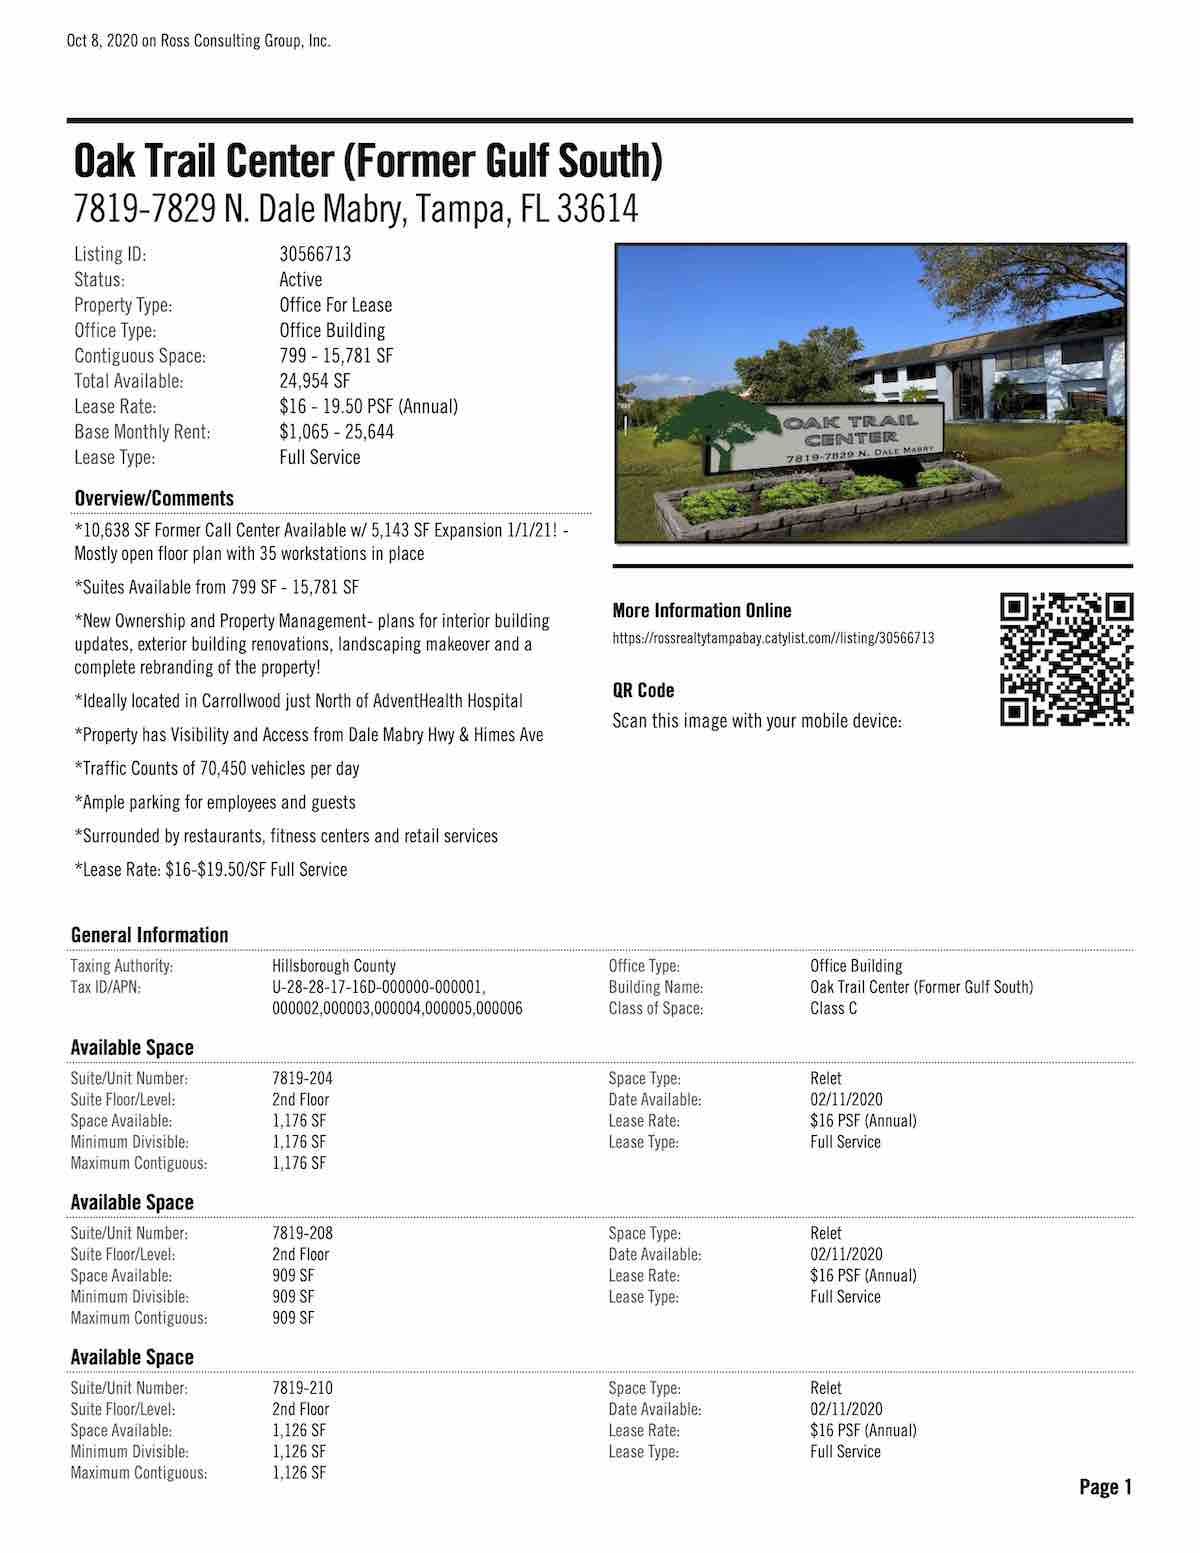 Tampa Commercial Real Estate - FOR LEASE - Oak Trail Center (Former Gulf South) - Oak Trail Center (Former Gulf South) - 7819-7829 N. Dale Mabry, Tampa, FL 33614 P1